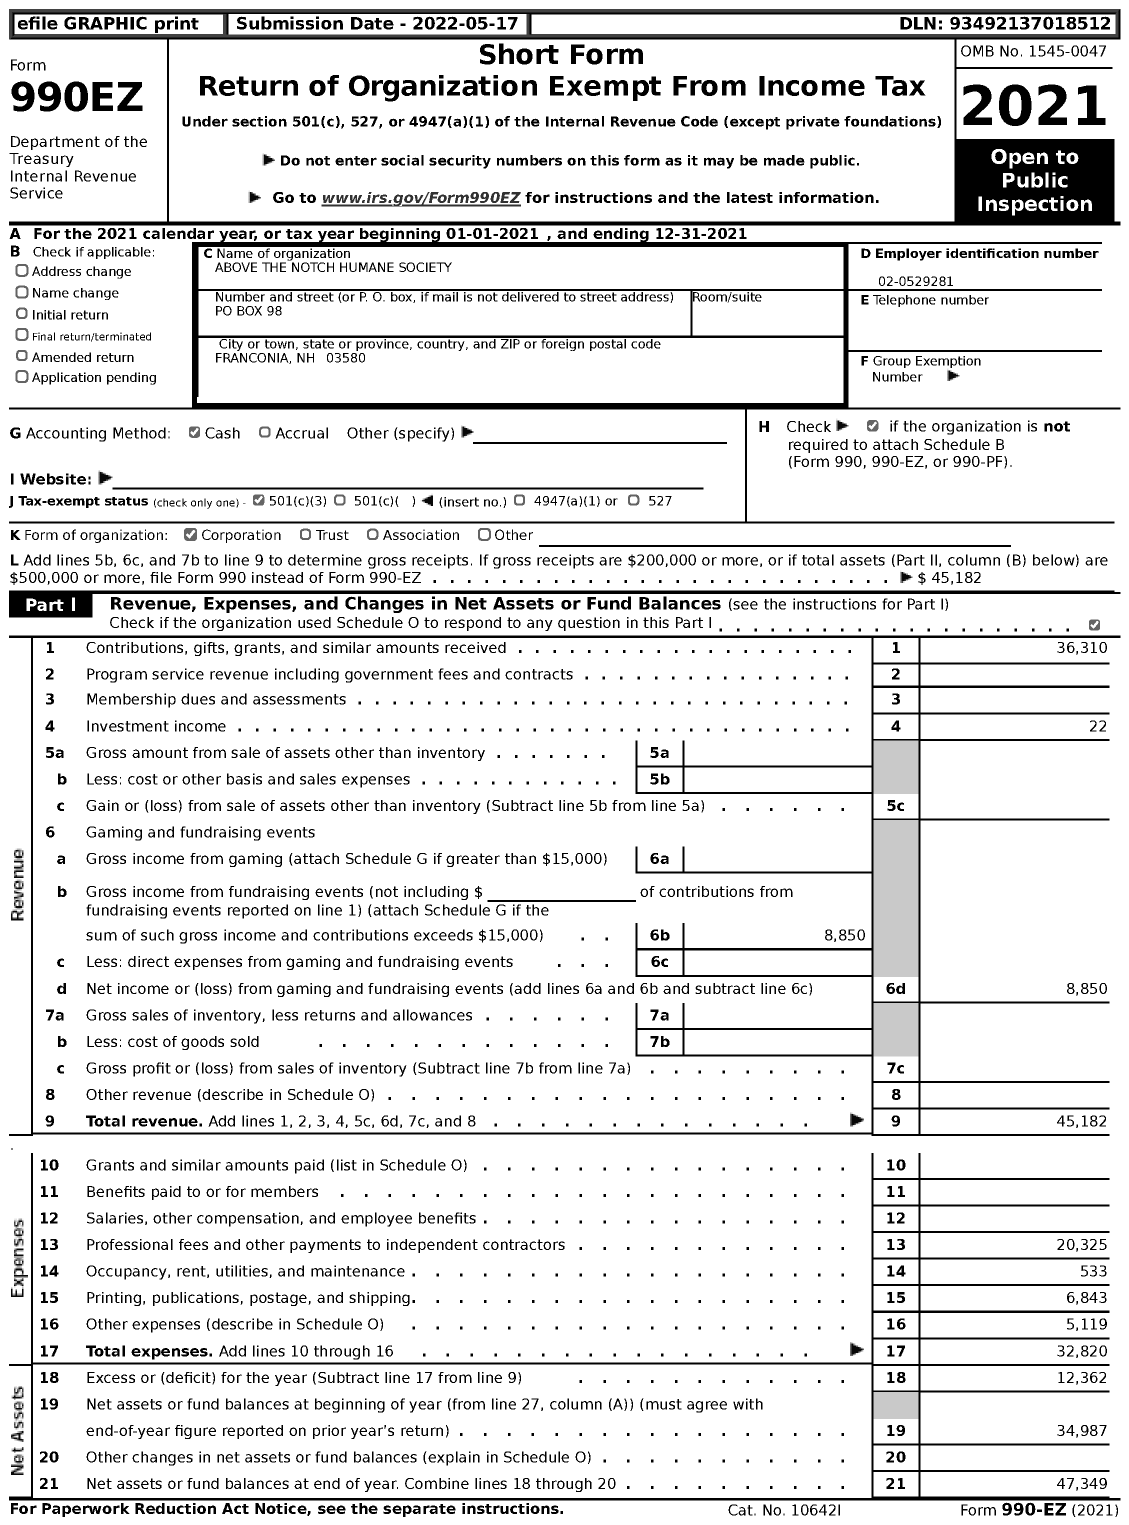 Image of first page of 2021 Form 990EZ for Above the Notch Humane Society